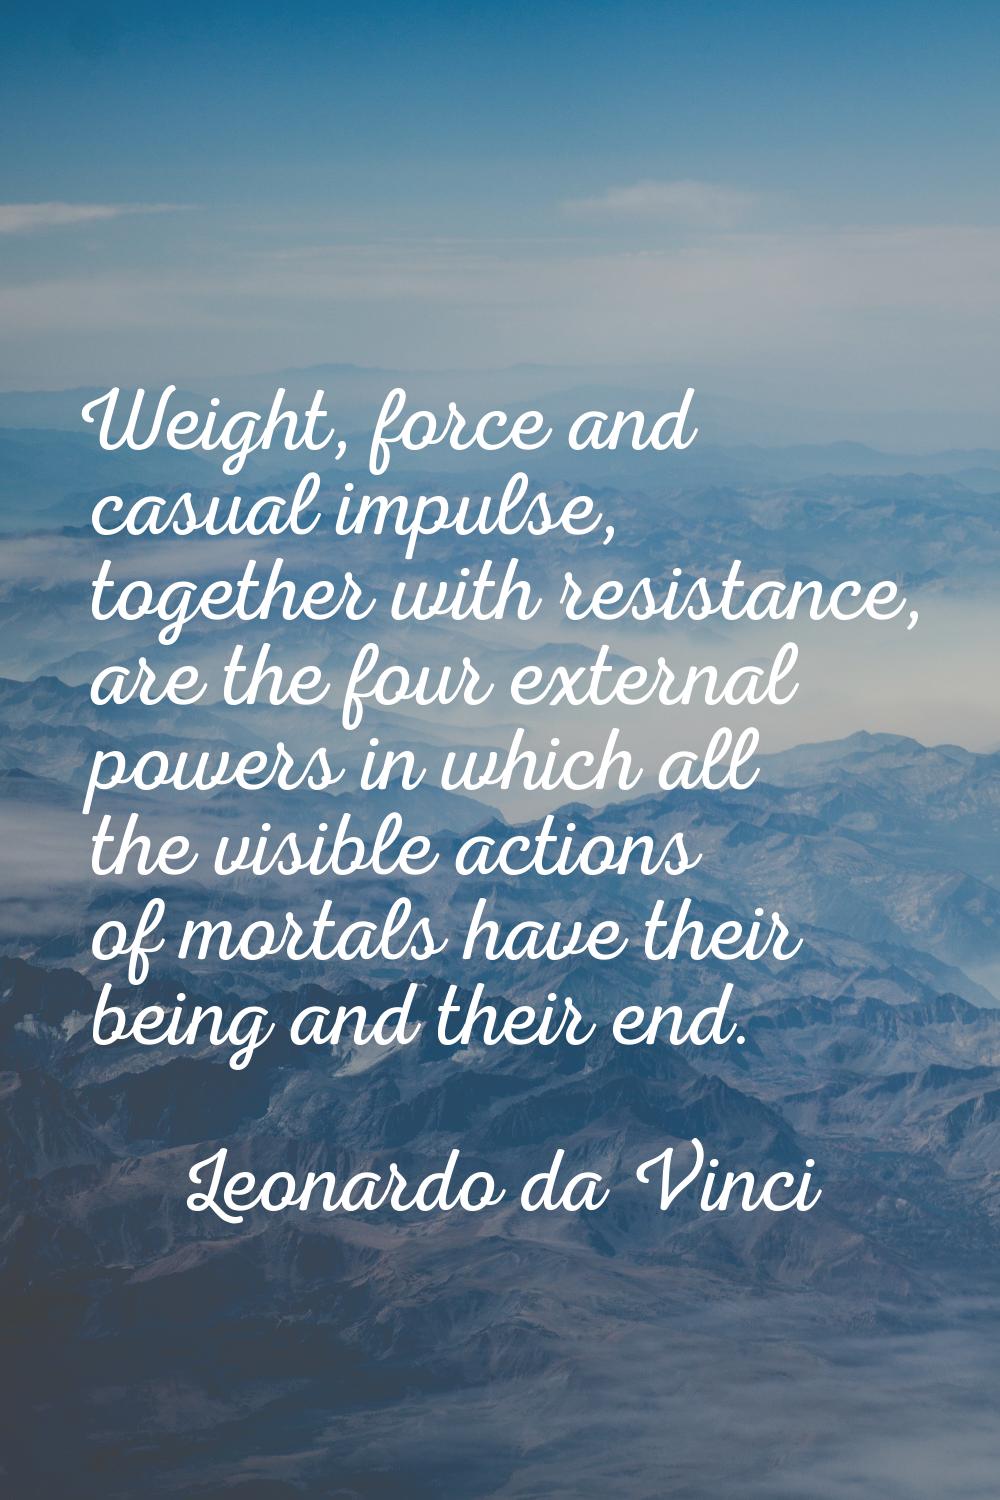 Weight, force and casual impulse, together with resistance, are the four external powers in which a